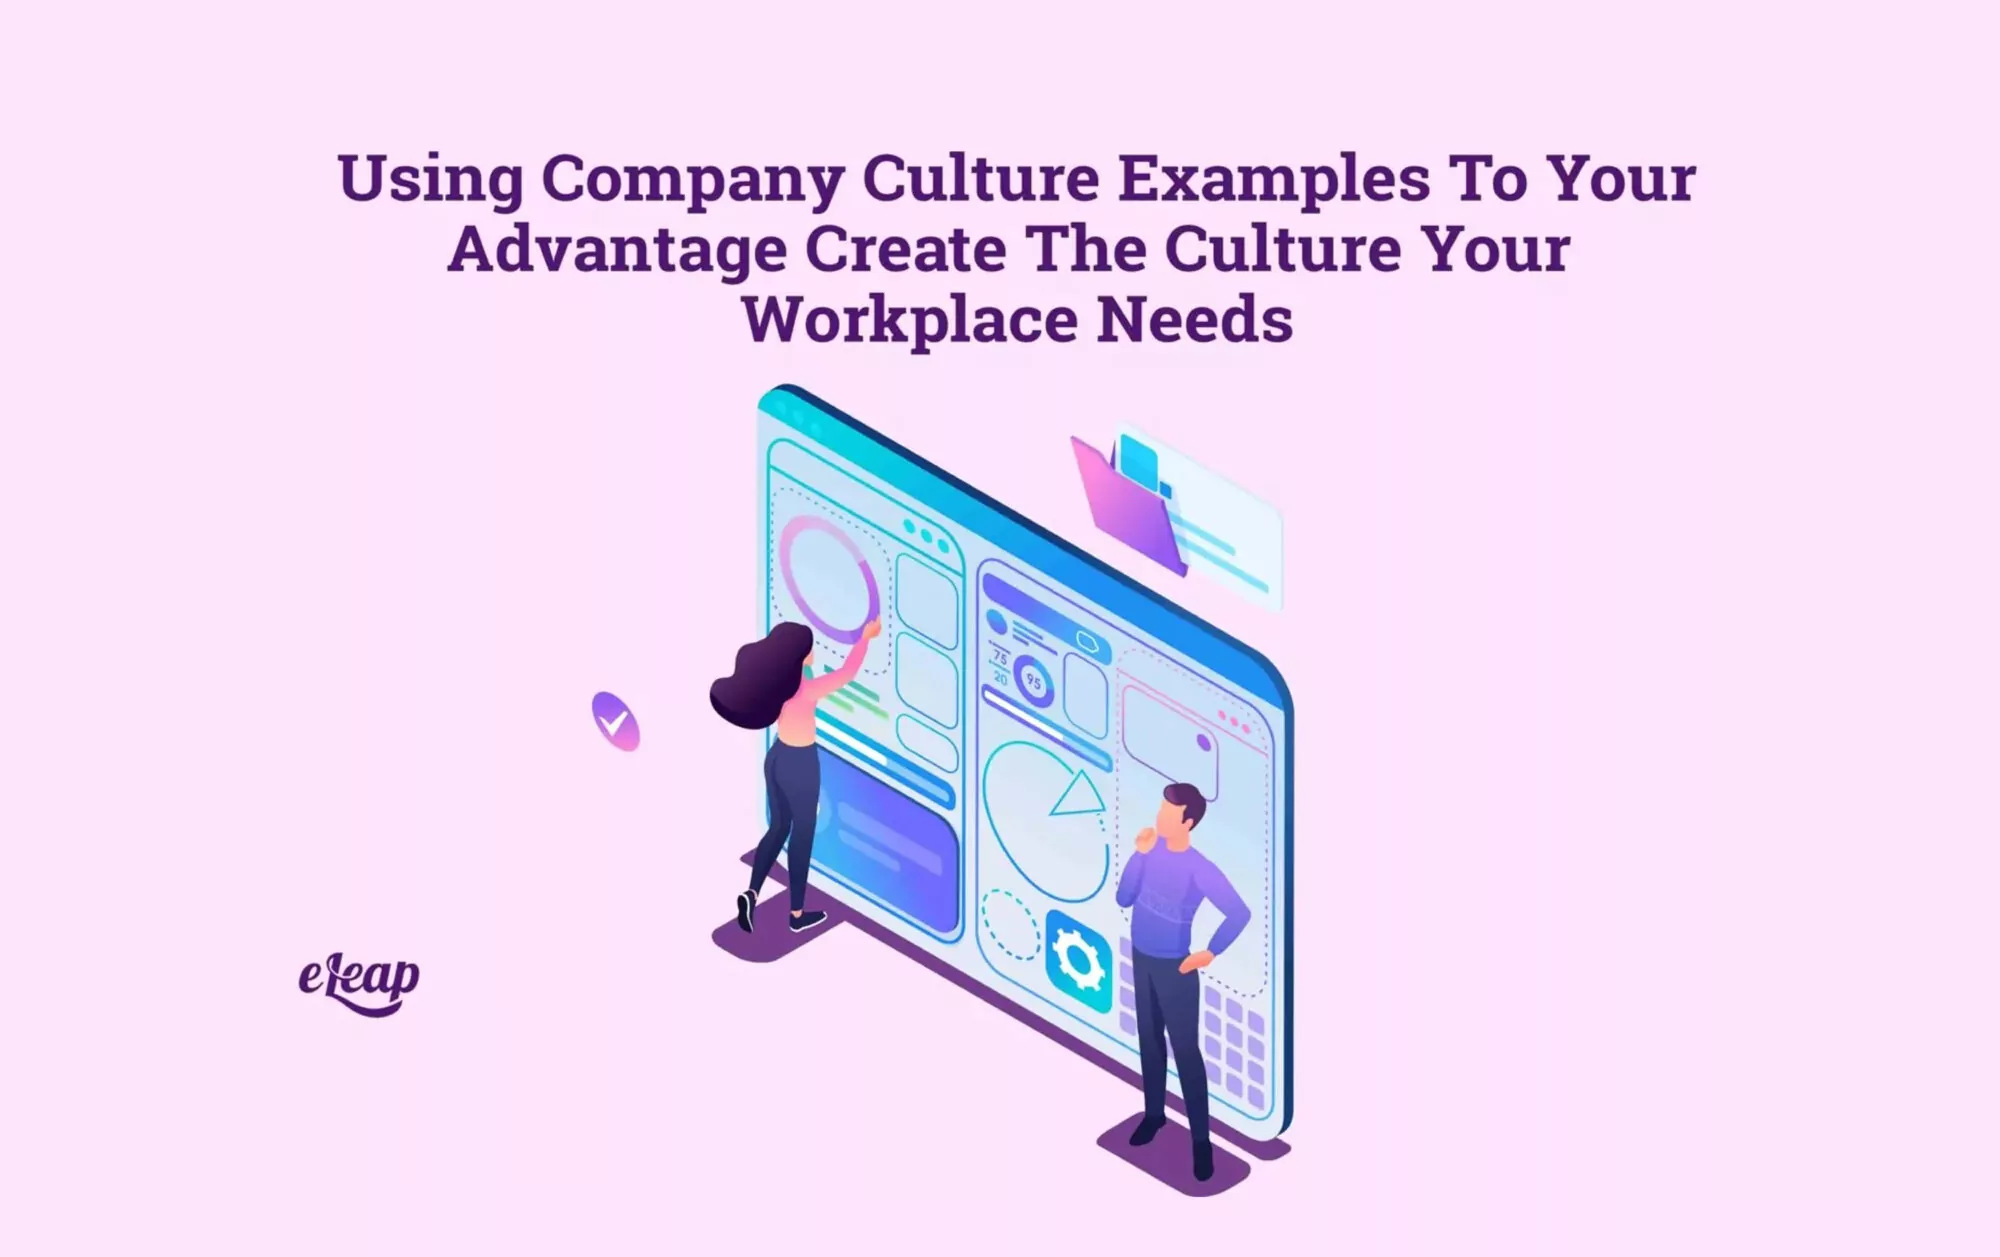 Using Company Culture Examples to Your Advantage – Create the Culture Your Workplace Needs